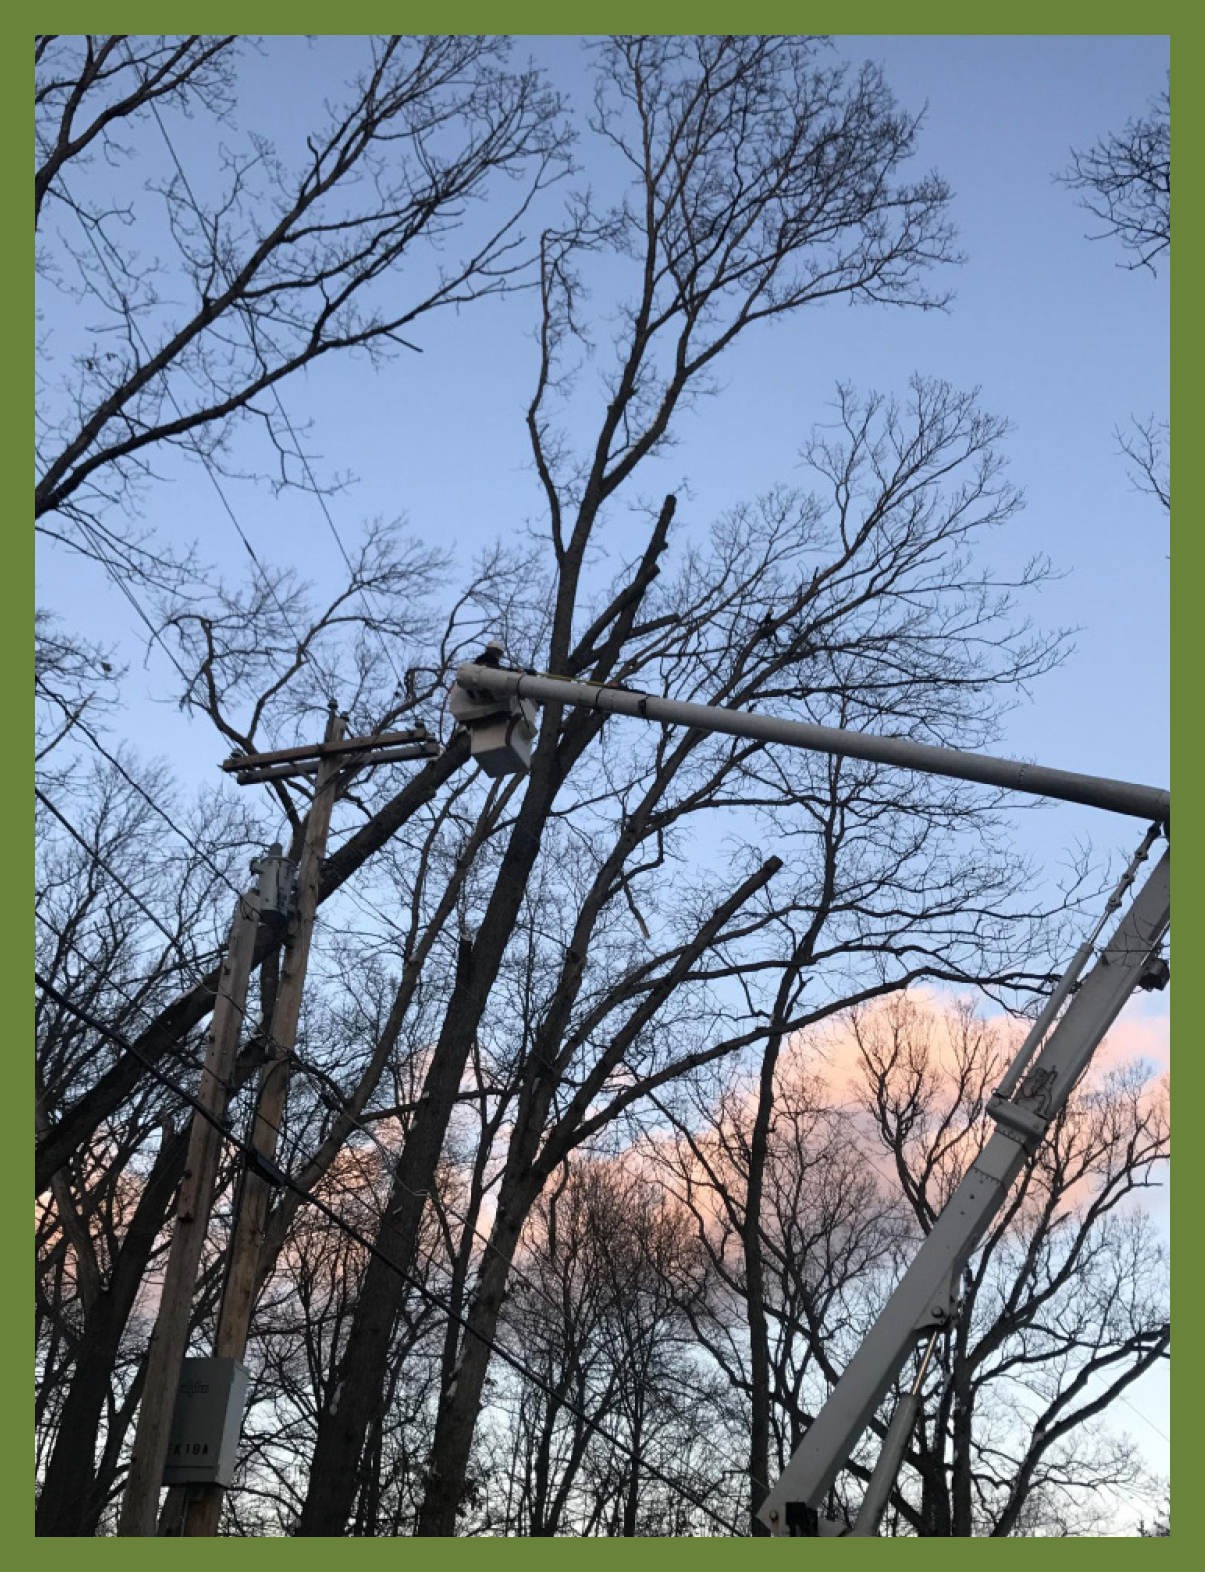 Pictured: A Sussex REC lineman in an aerial bucket extended over the top of a utility pole uses a handheld tool to trim branches away from power lines